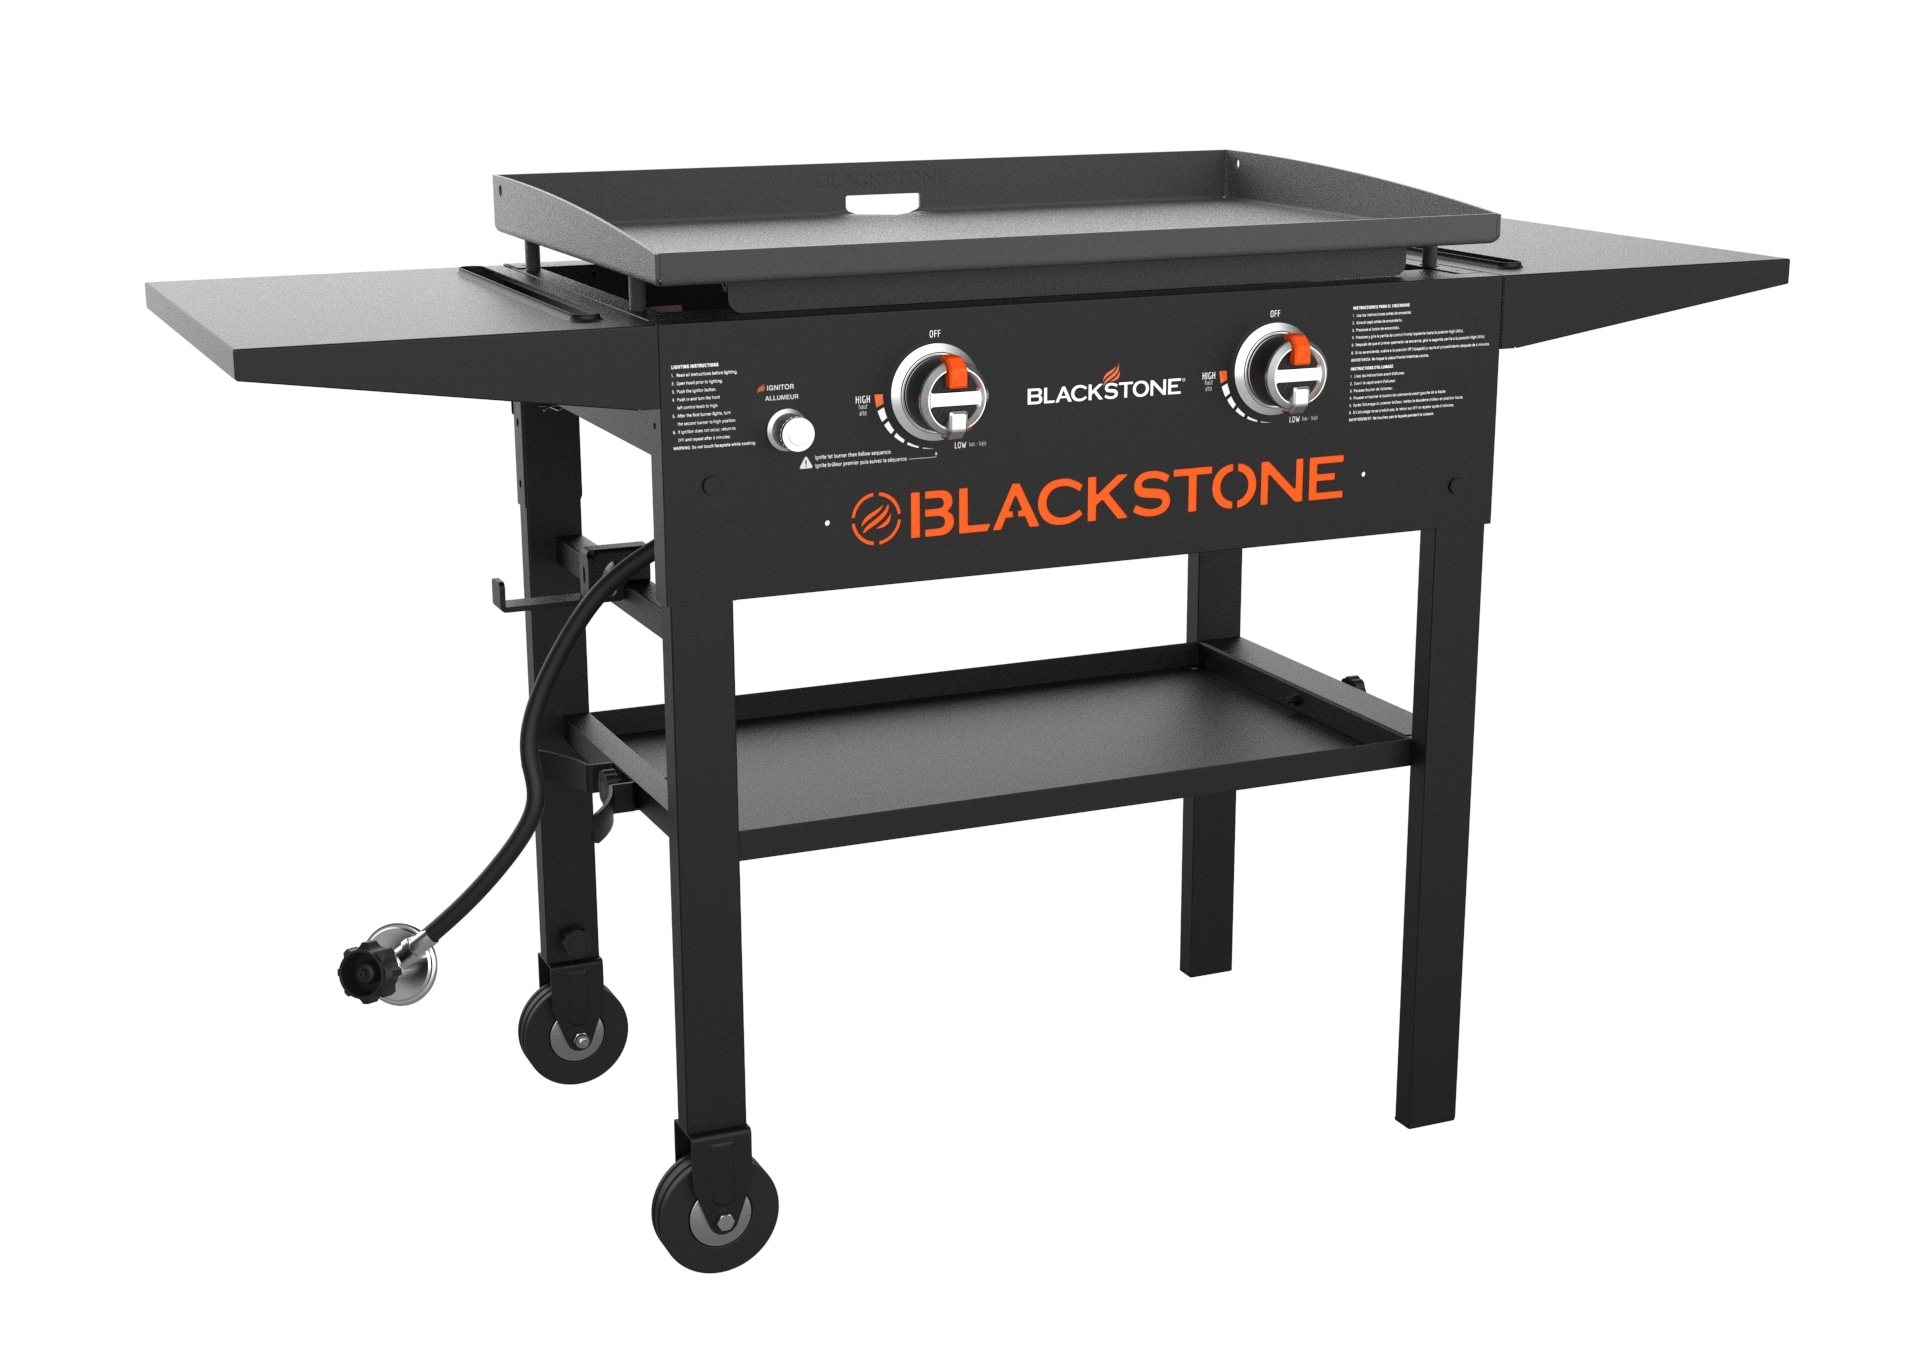 Shop Blackstone Culinary 28 Cabenet Griddle with Air Fryer and Blackstone  Grill Cover, Grill Cleaner Essentials, Grill Accessories, Grill Tools and  Utensils at